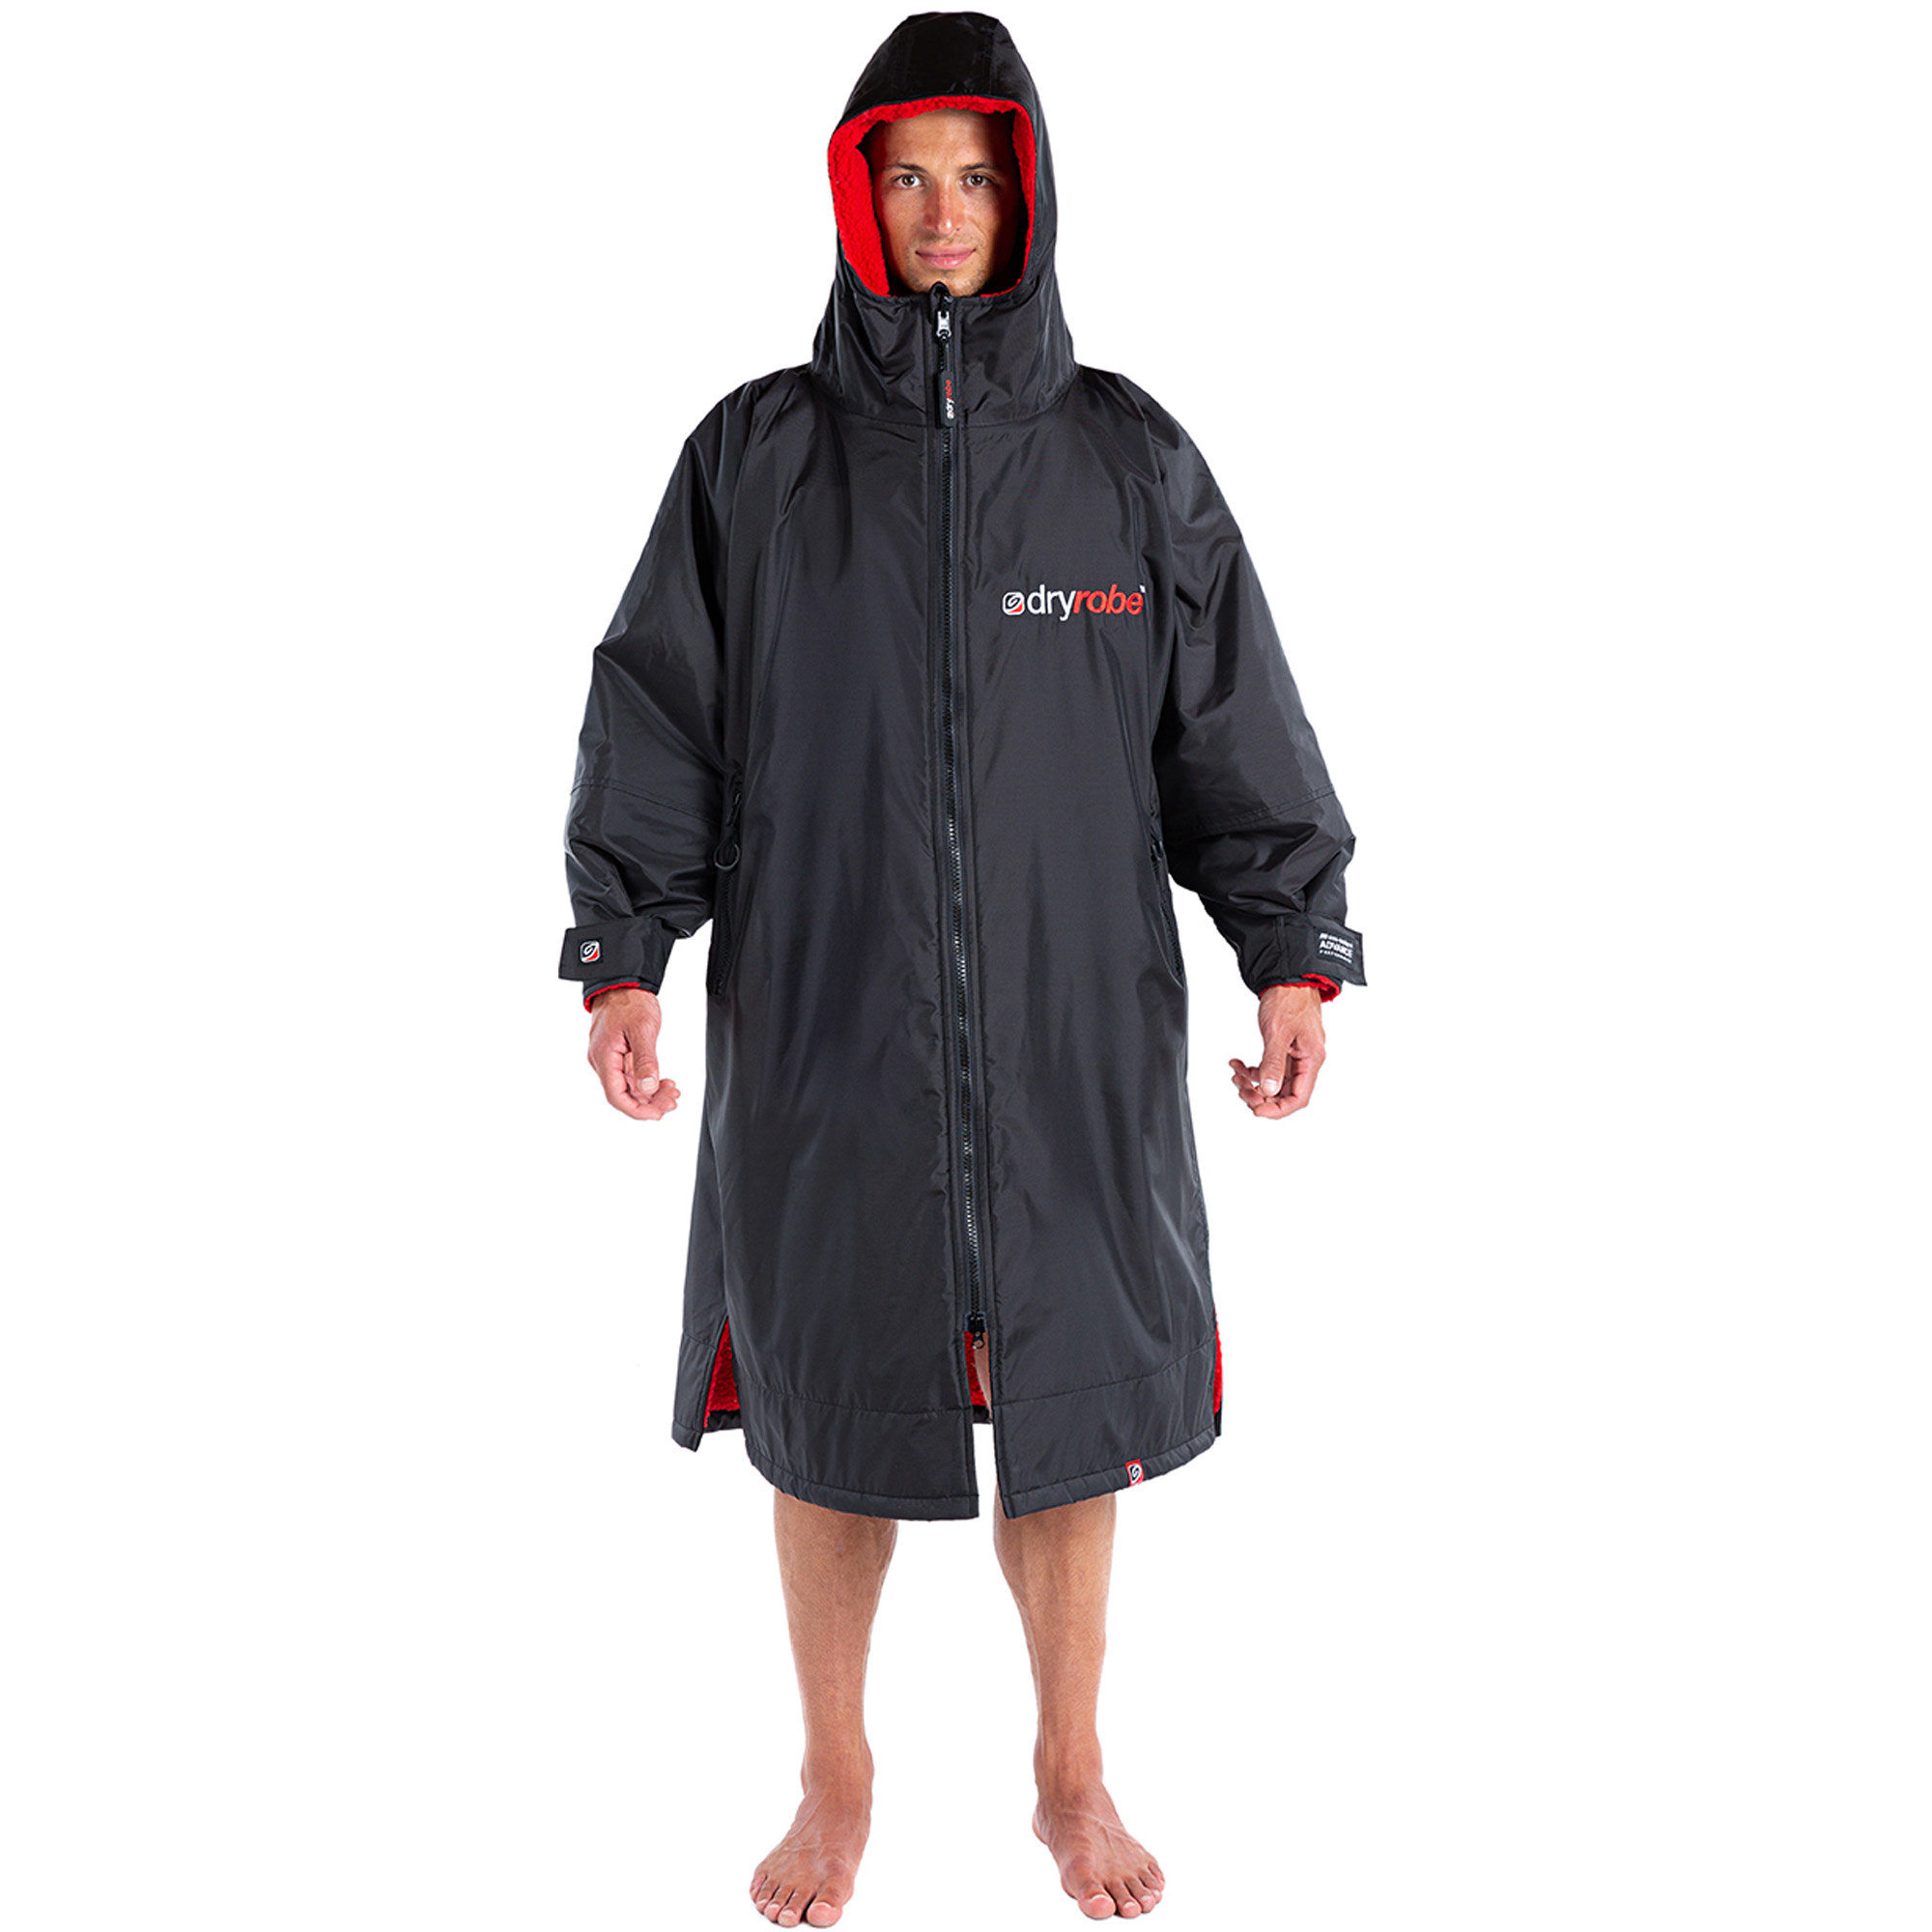 dryrobe Advance Long Sleeve Towelling Changing Robe